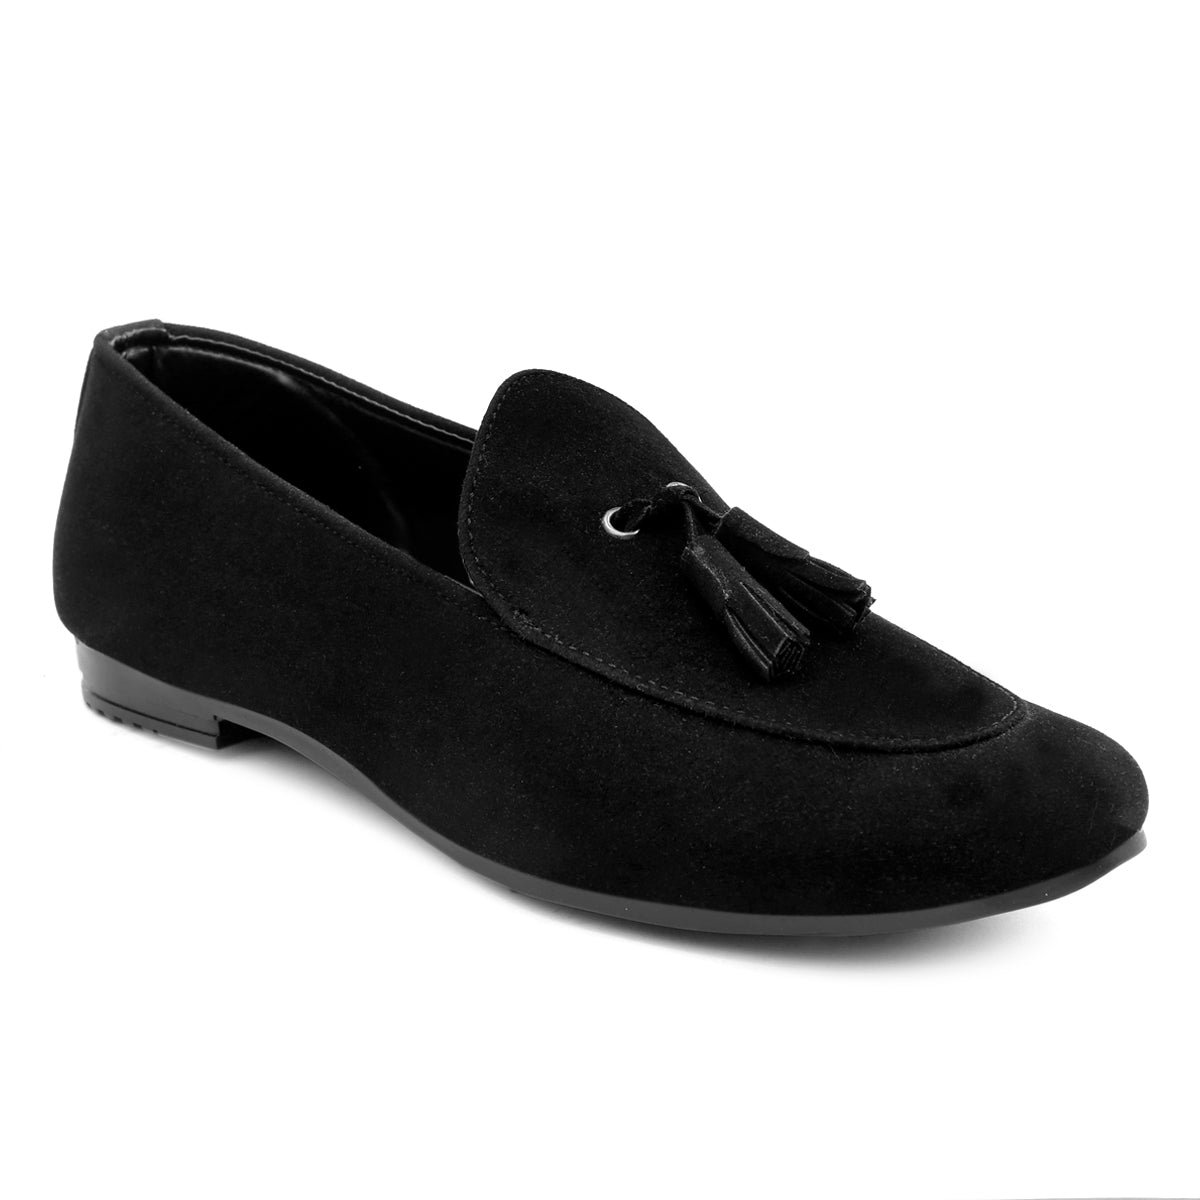 LOAFERS AND MOCASSINS – BxxyShoes